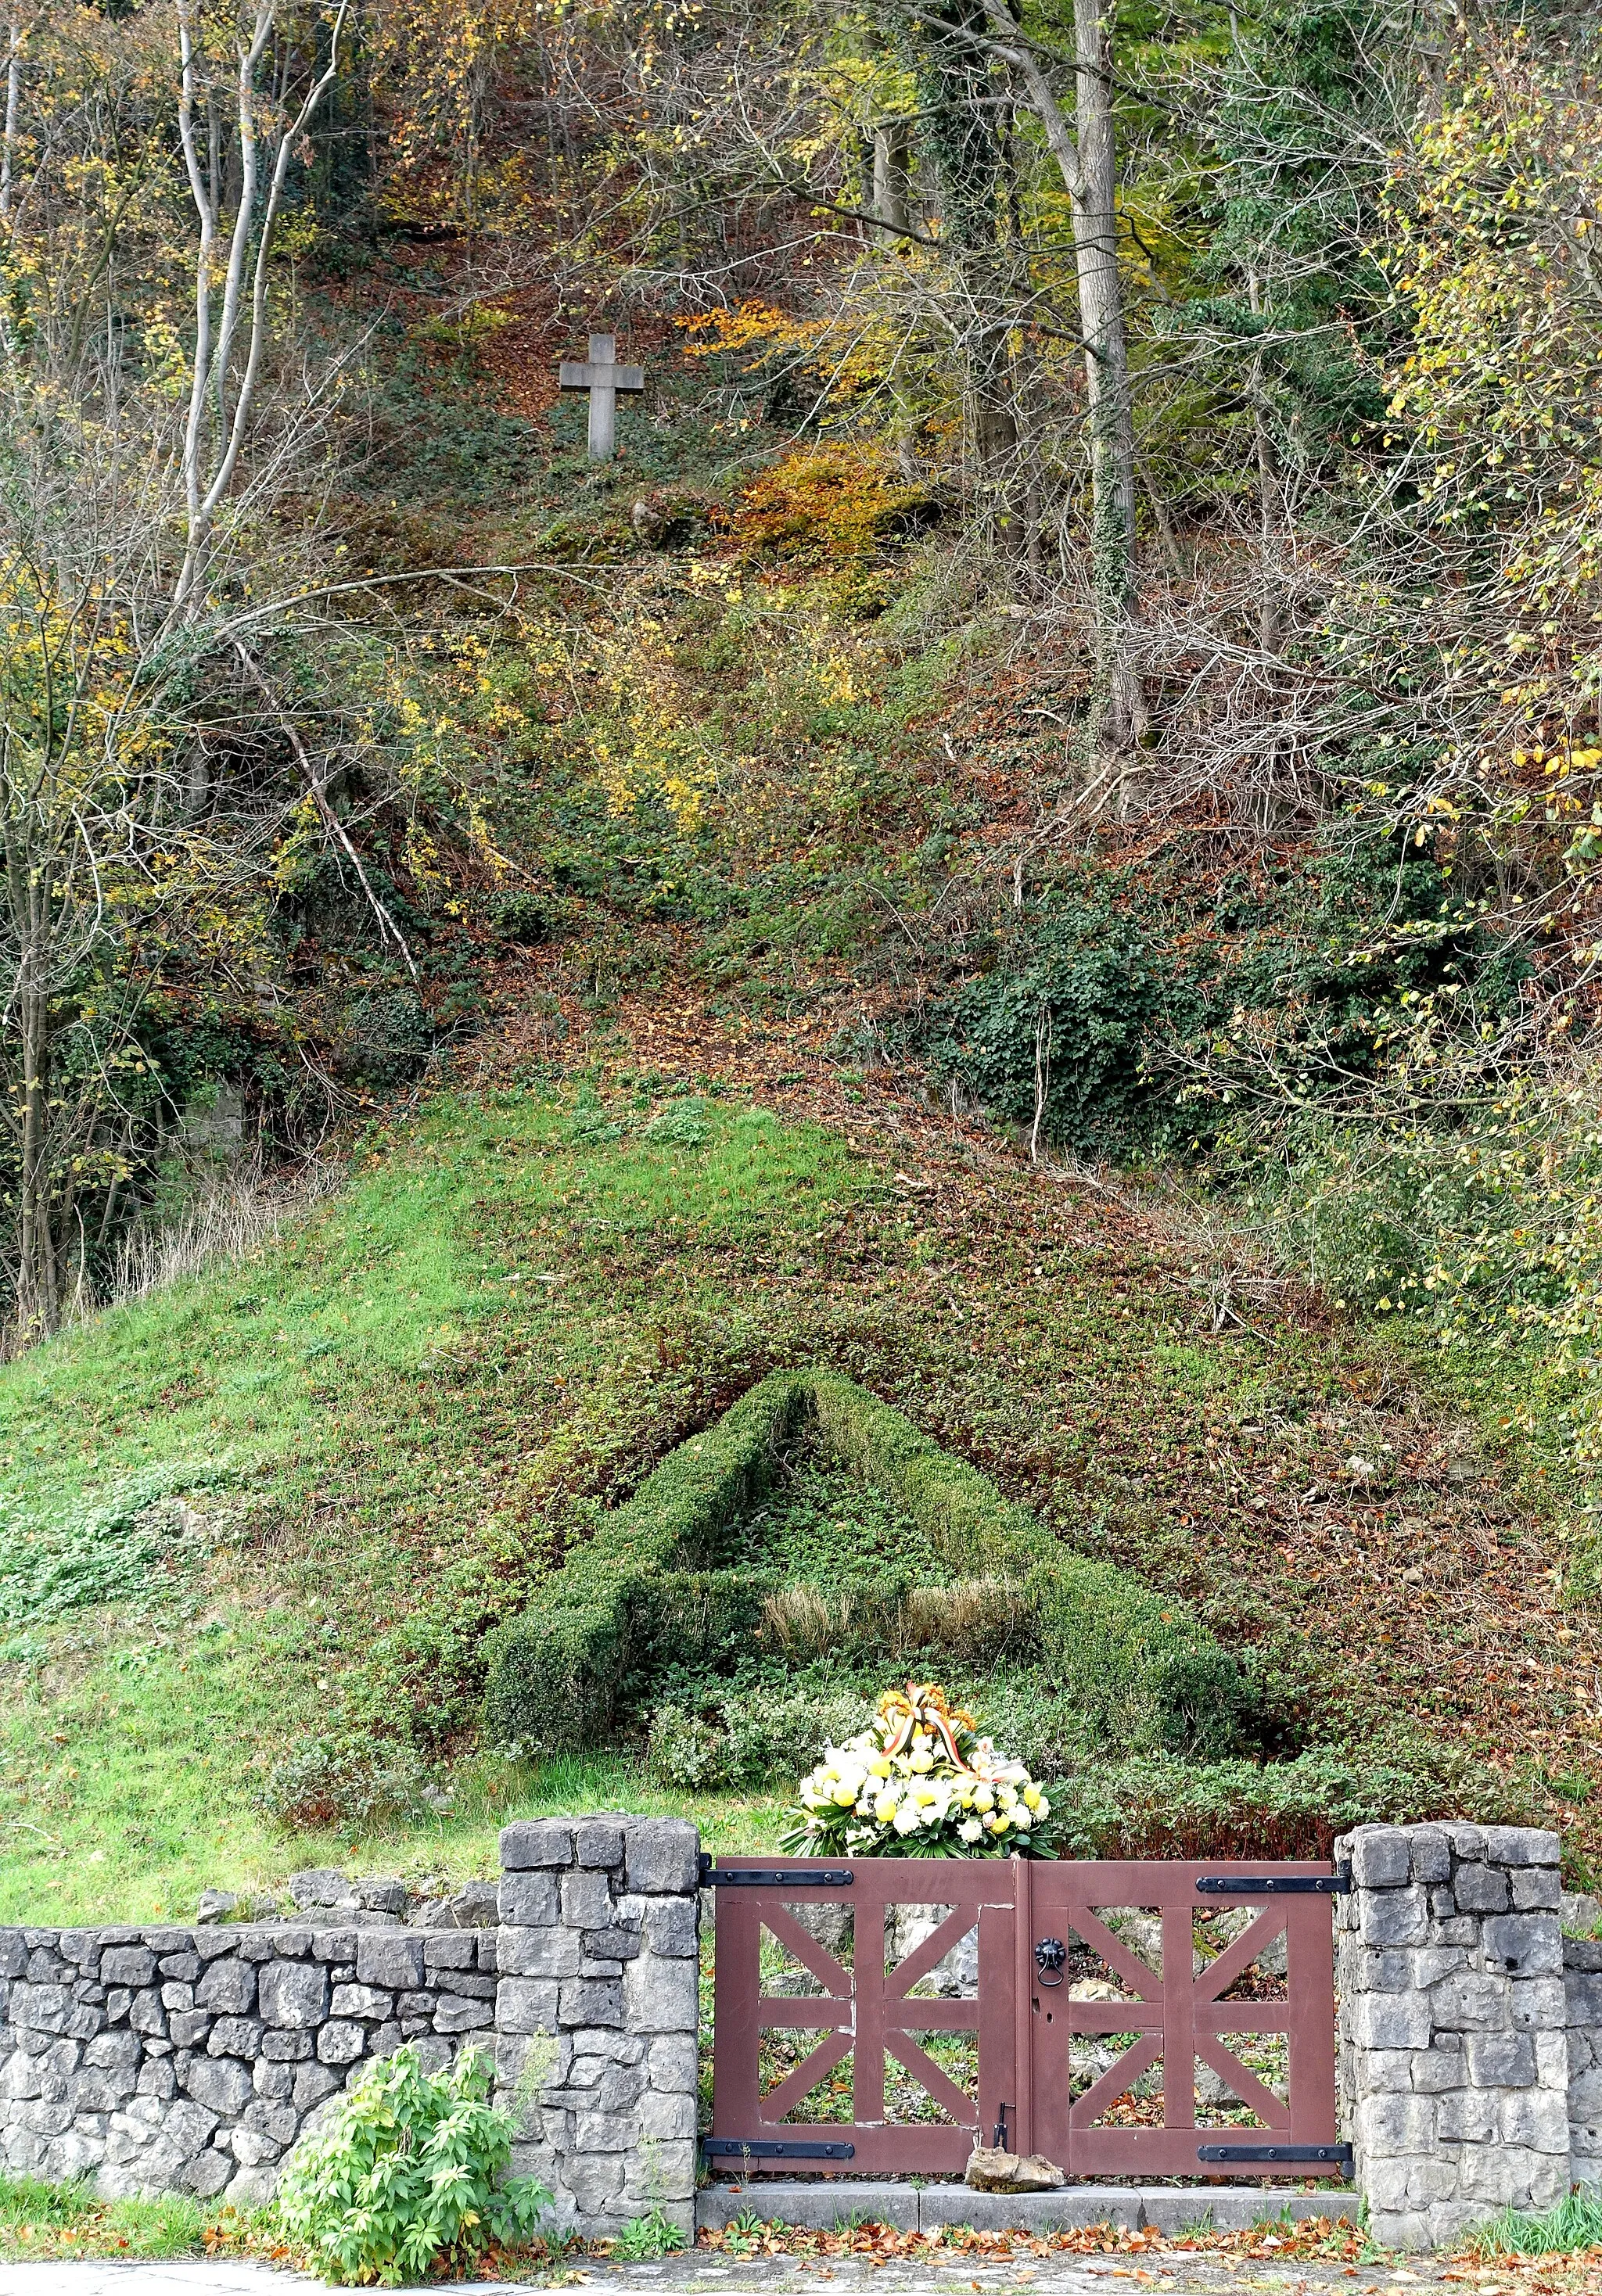 Photo showing: Monument at the place where, on 17 February 1934, the Belgian King Albert I fell from a rock while climbing and died on the spot. The cross marks the spot where King Albert I's body was found.